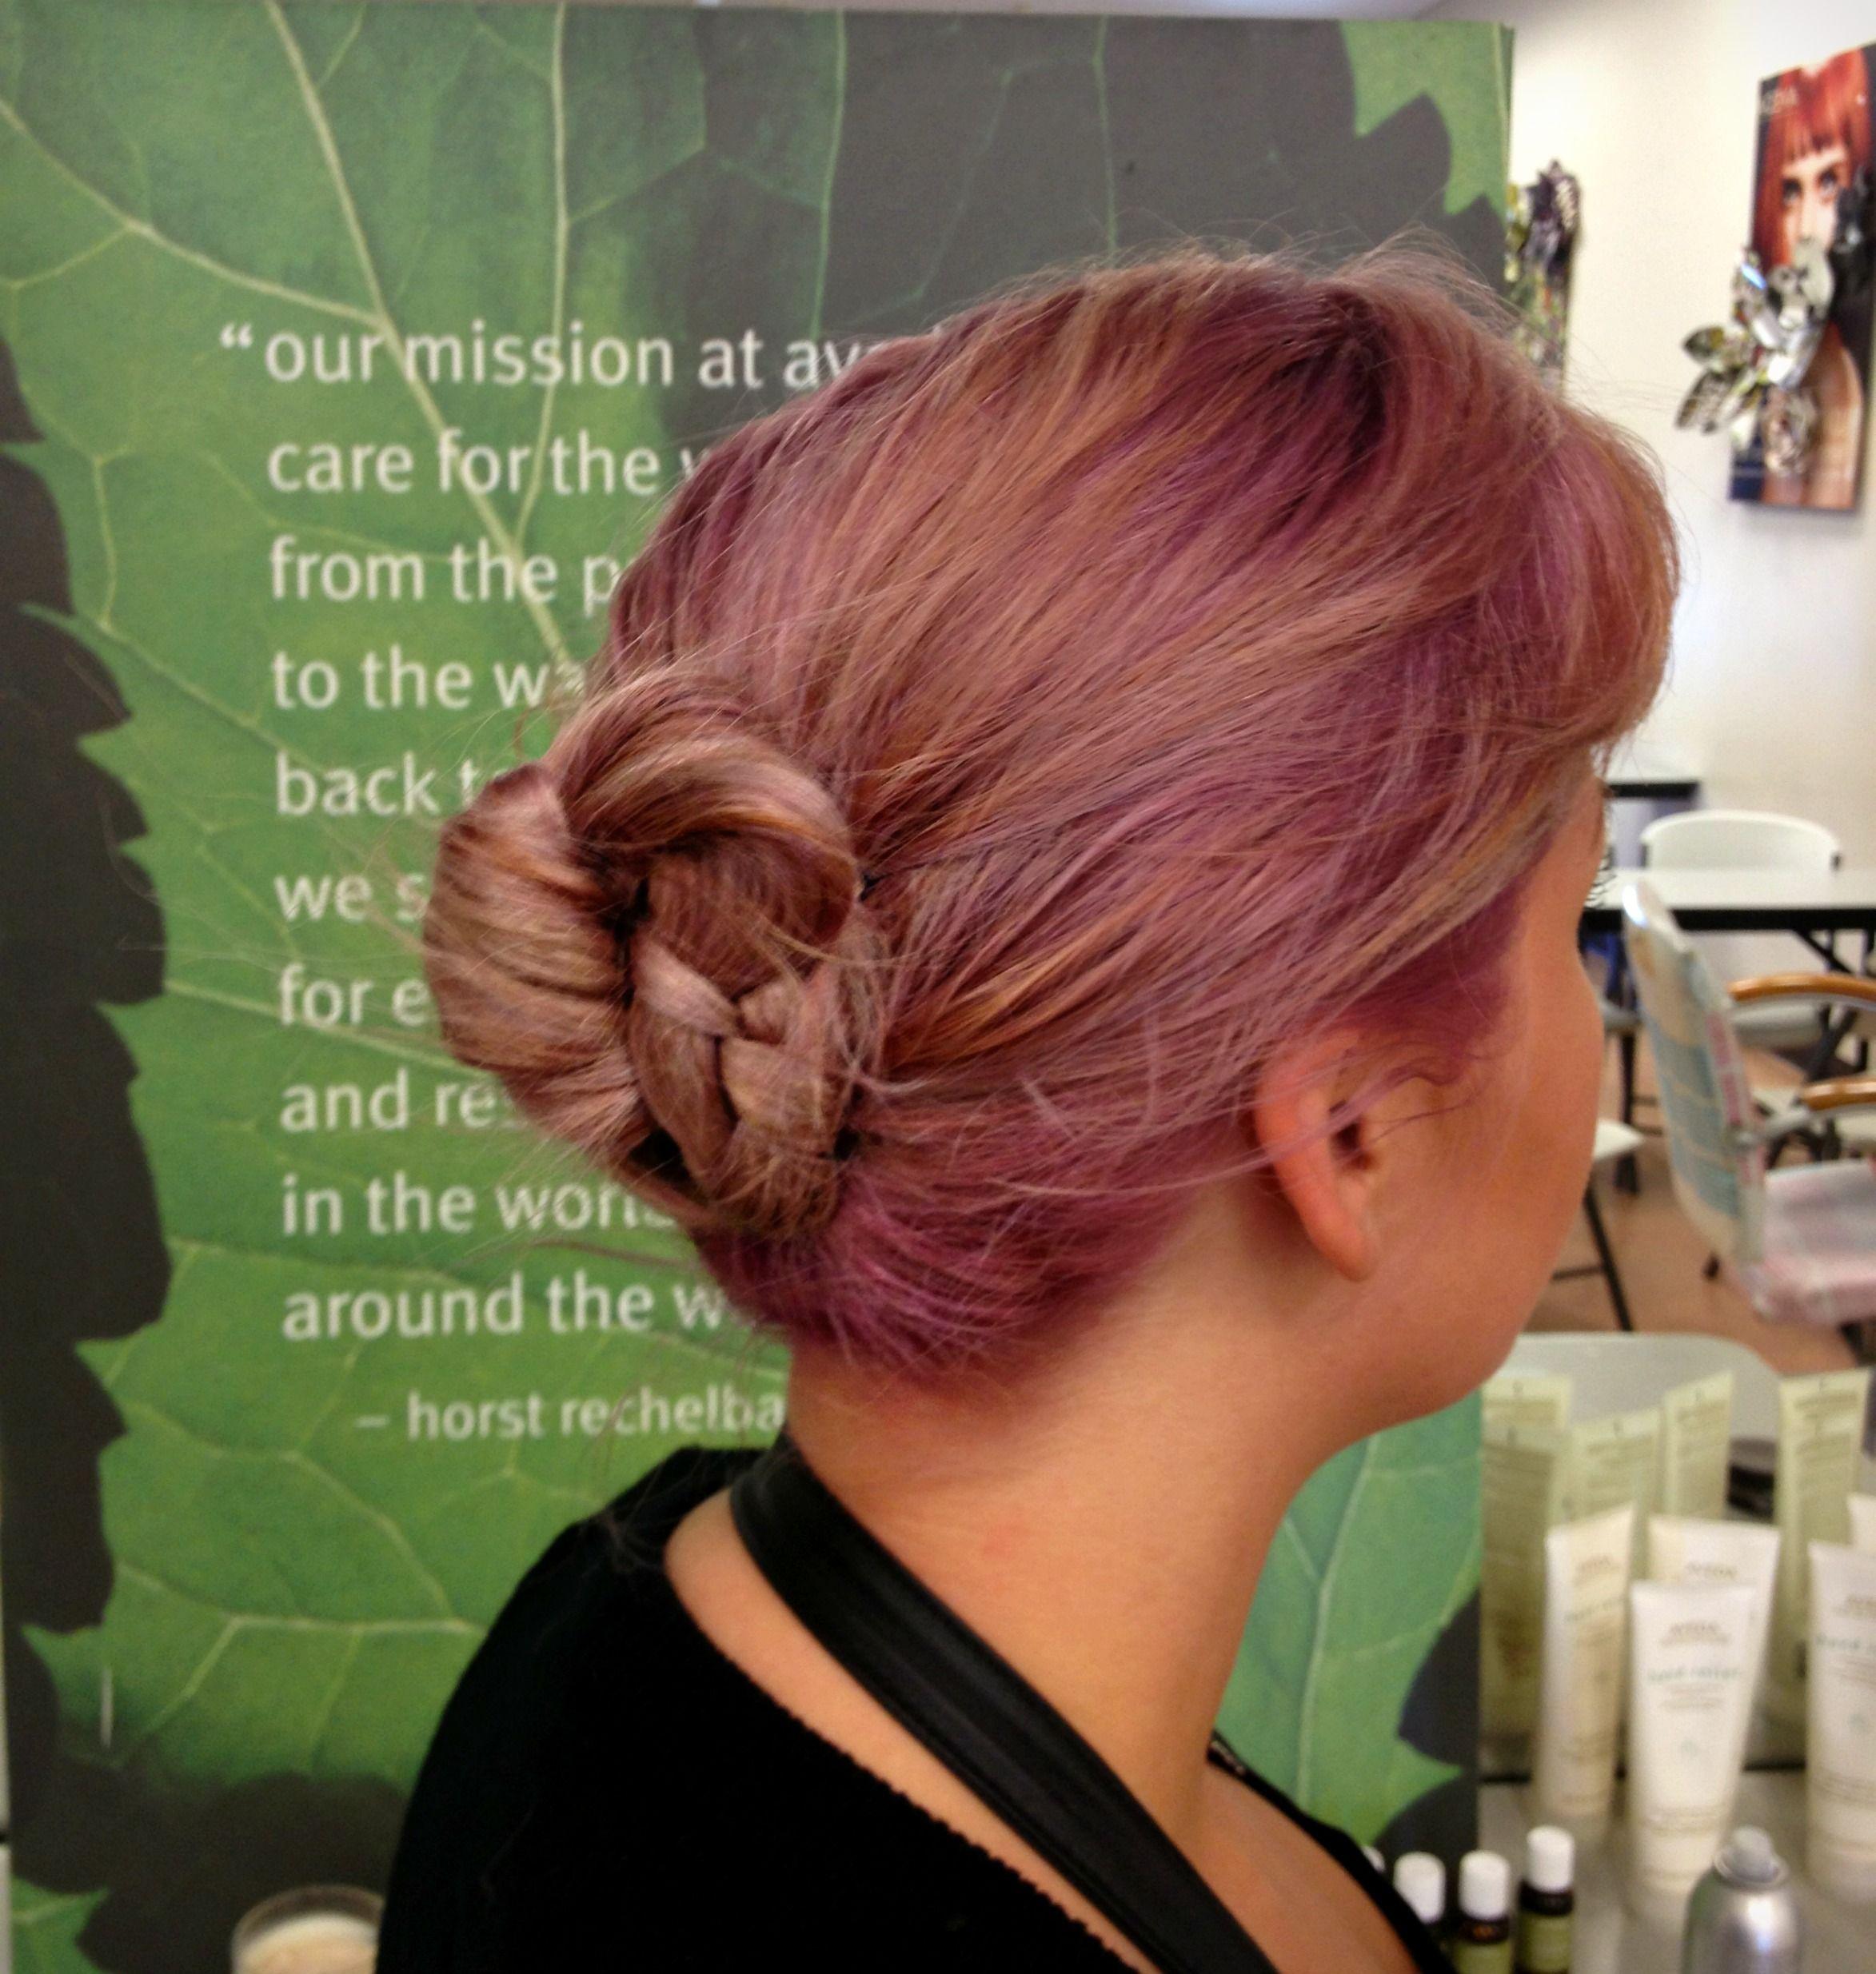 Bun With Red W Logo - Messy Braided Bun Upstyle Video Tutorial by AIP Educator Andrew